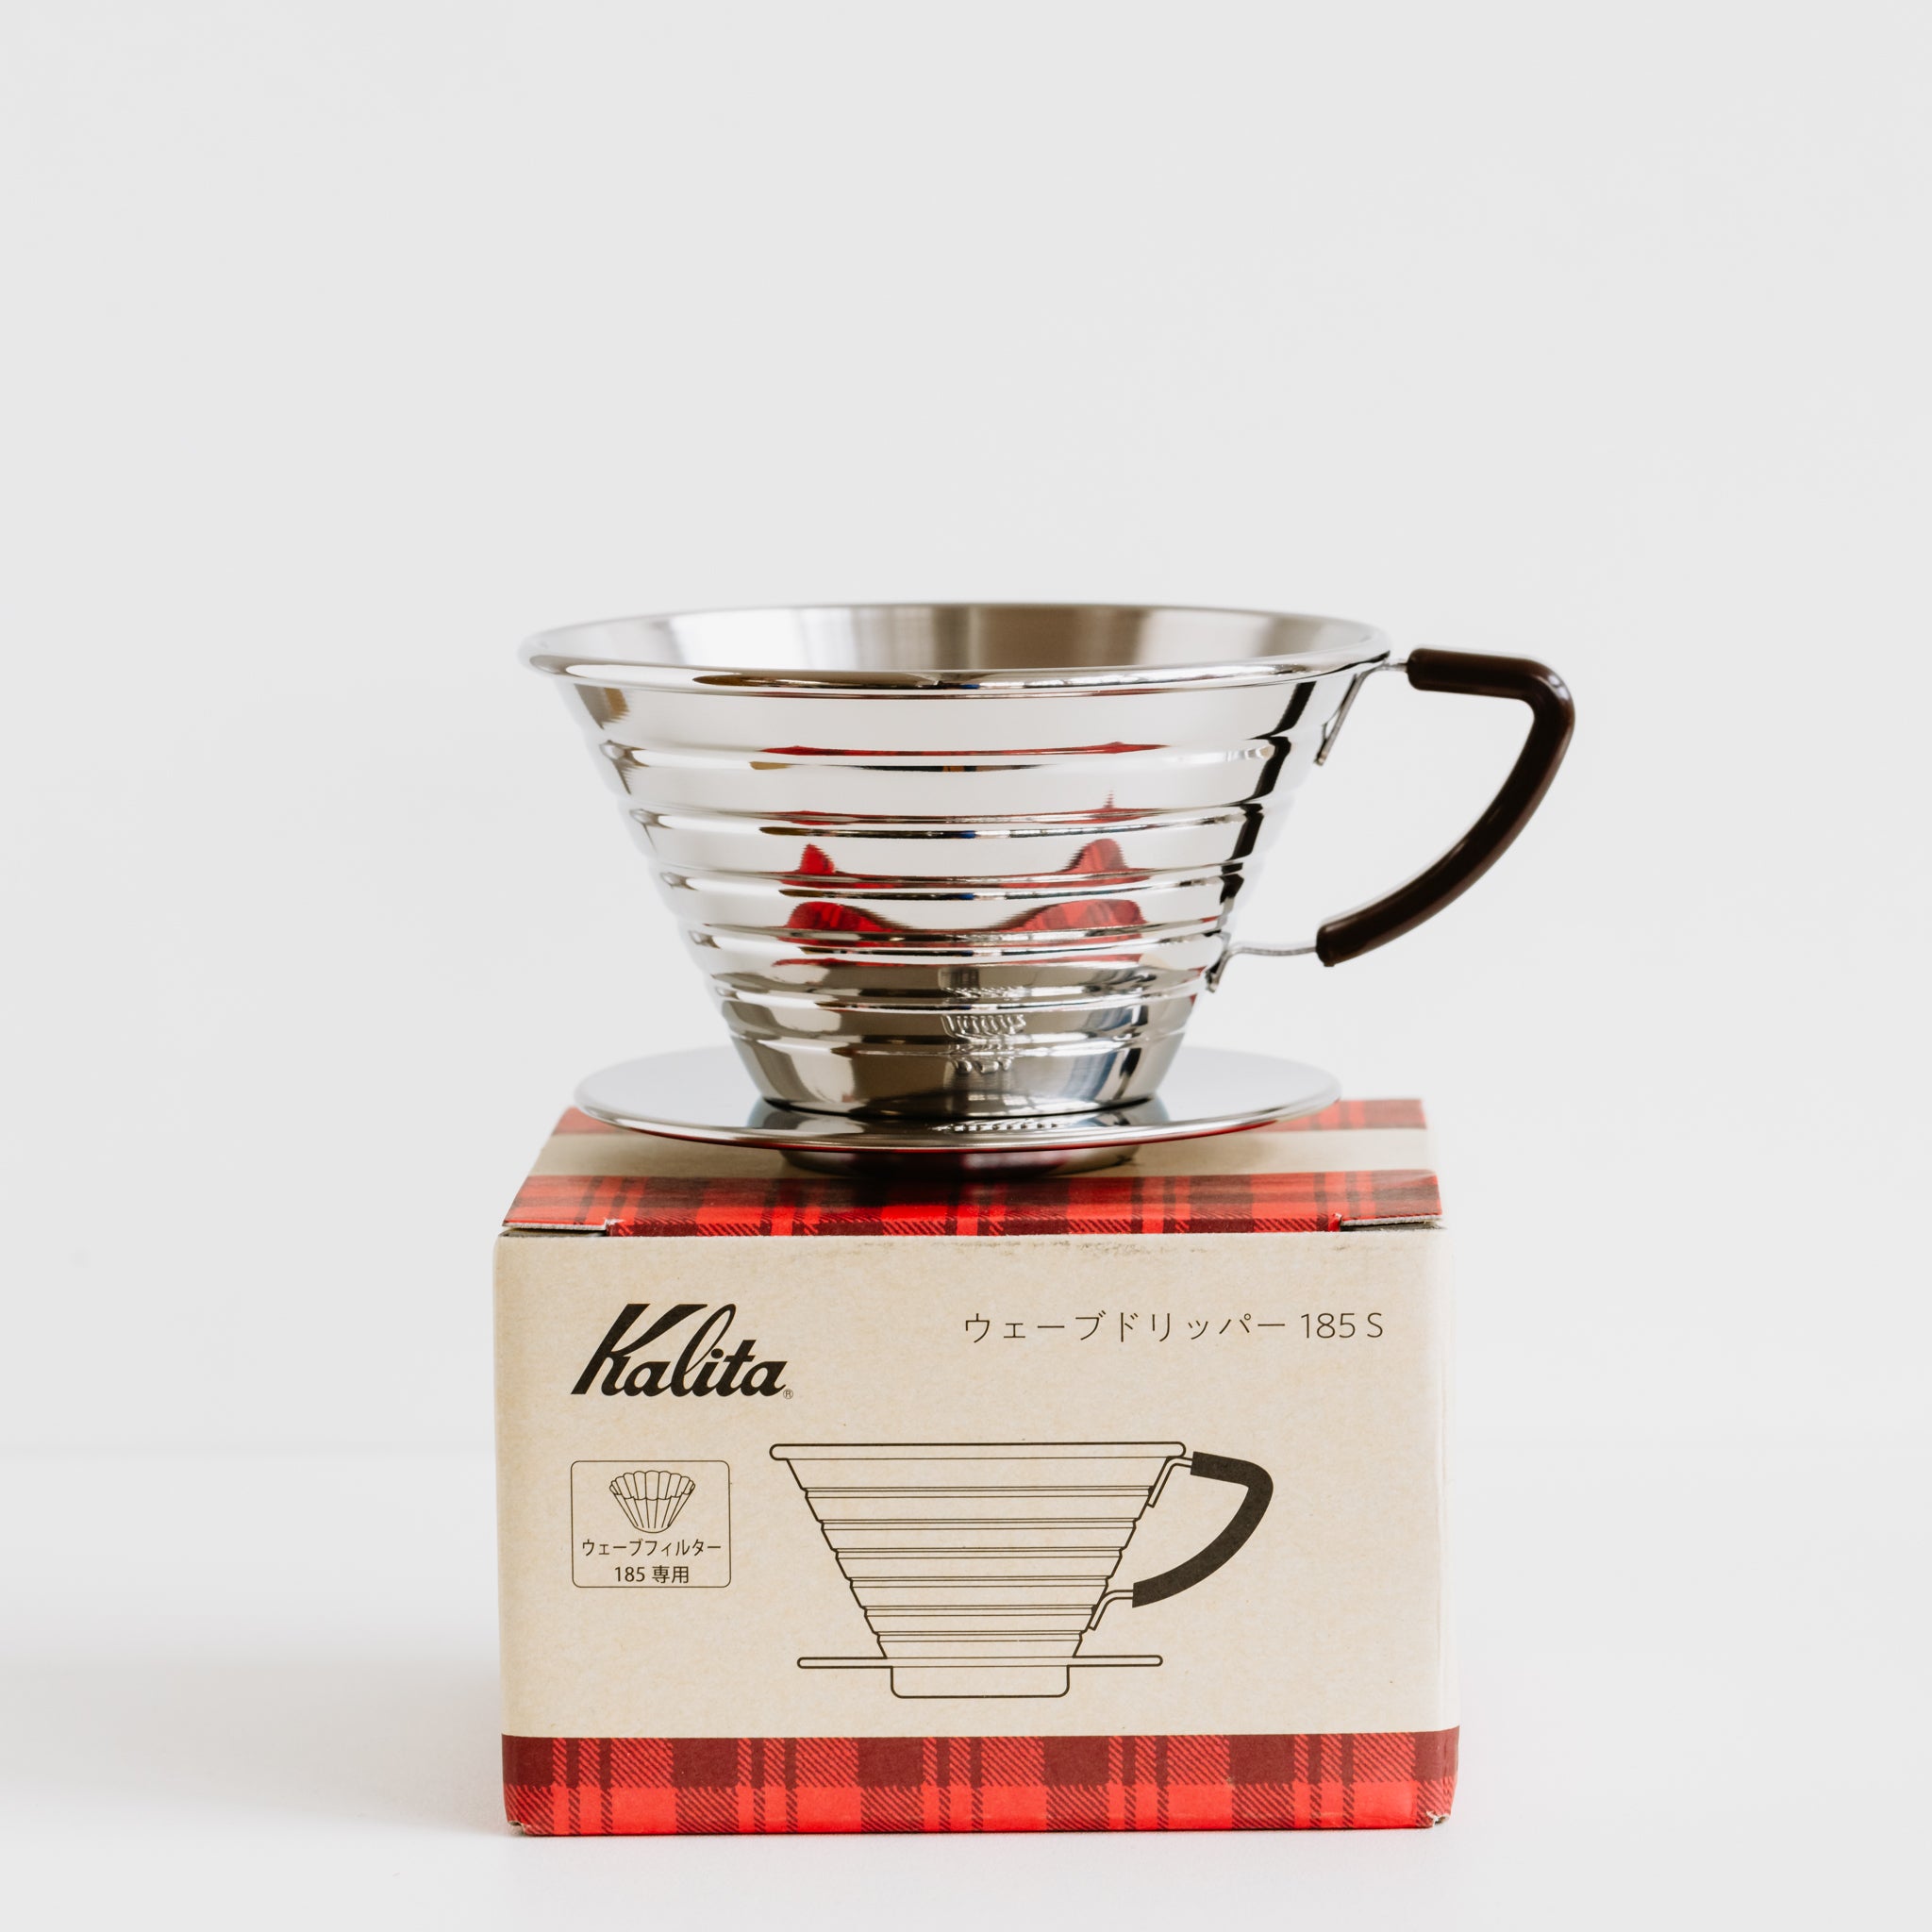 Kalita Wave 185 dripper on top of product box.